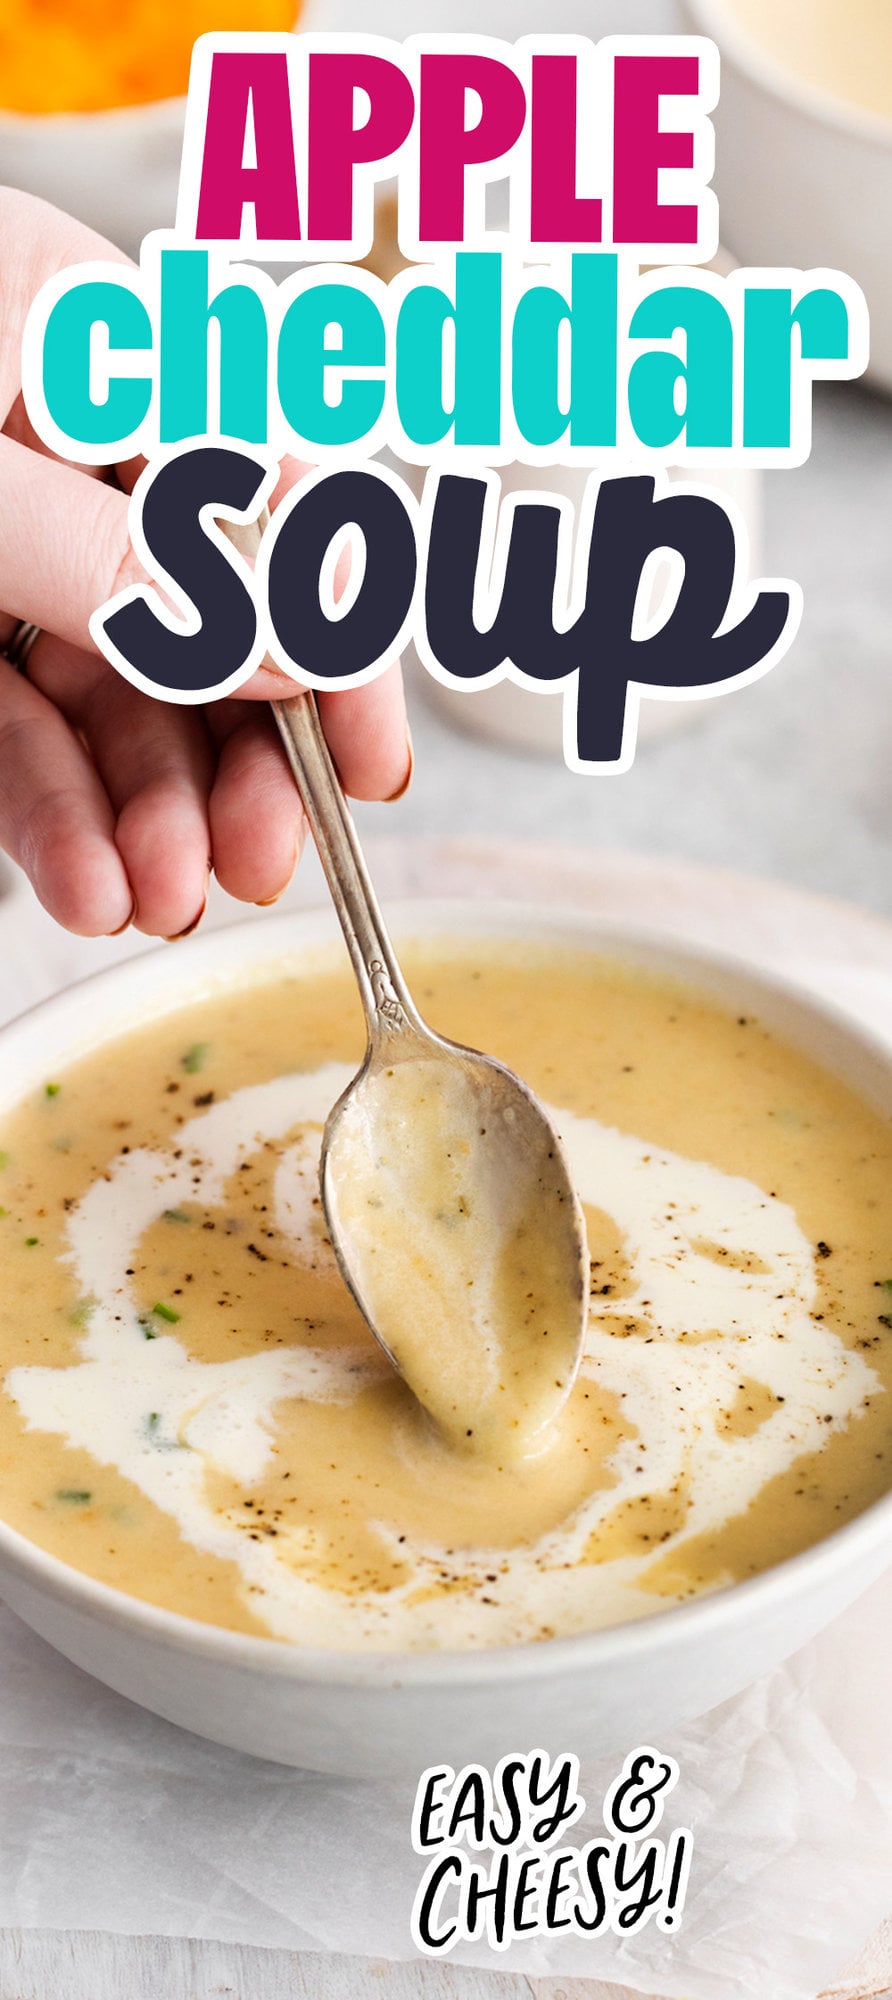 a hand holding a spoon dipping into a bowl of cheddar soup with a swirl of cream and crack of pepper on top